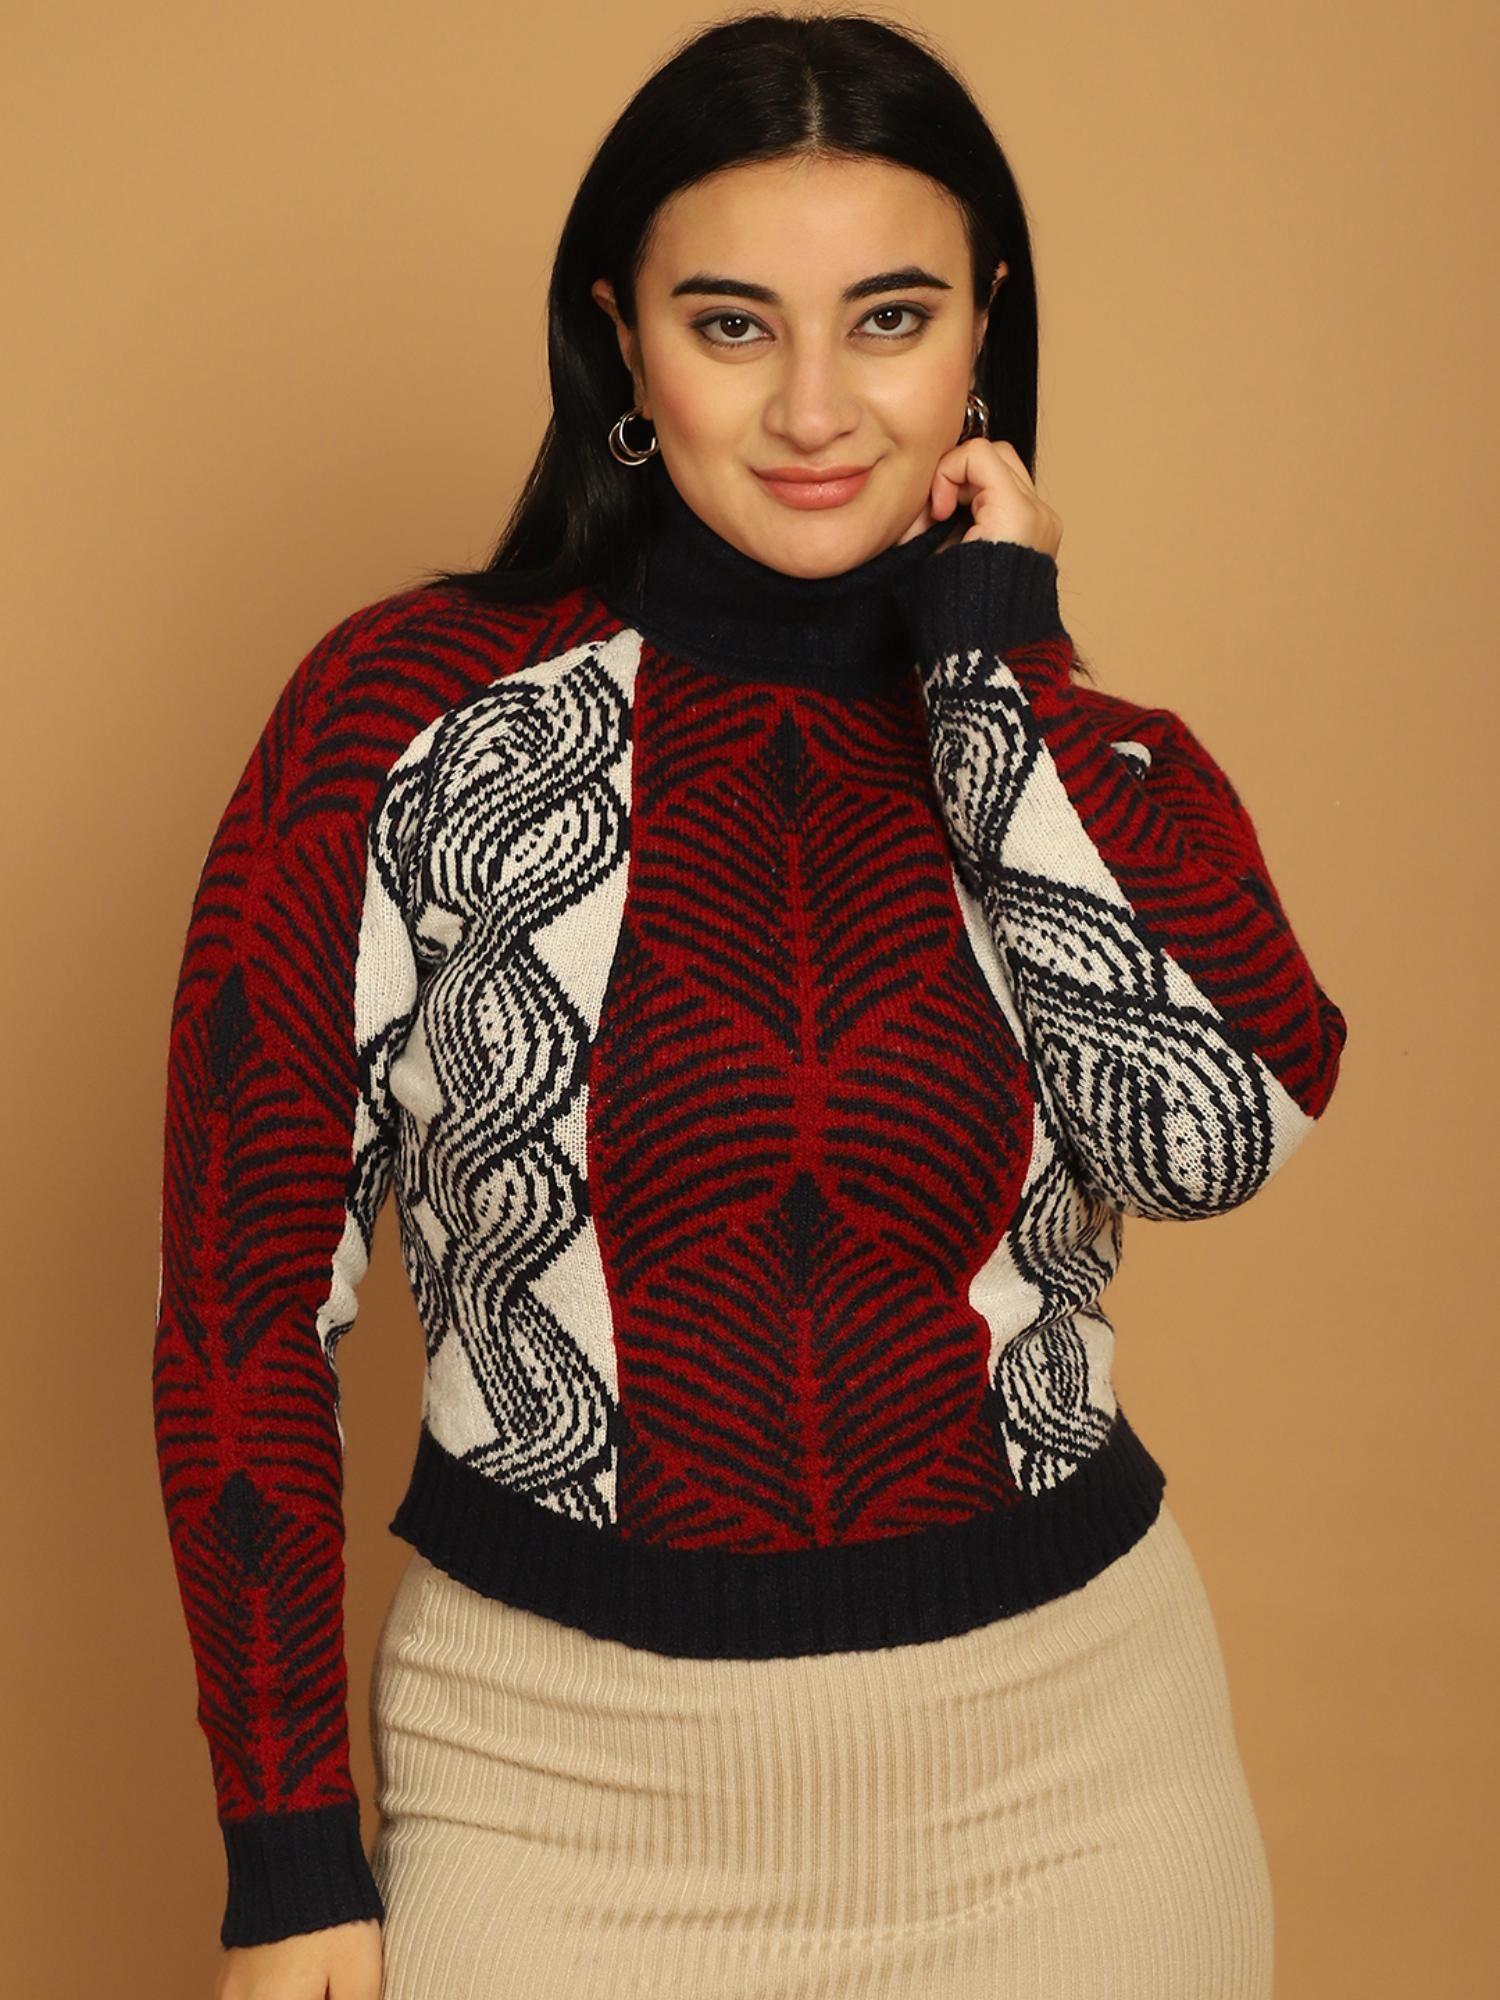 women's acrylic full sleeve printed red sweater